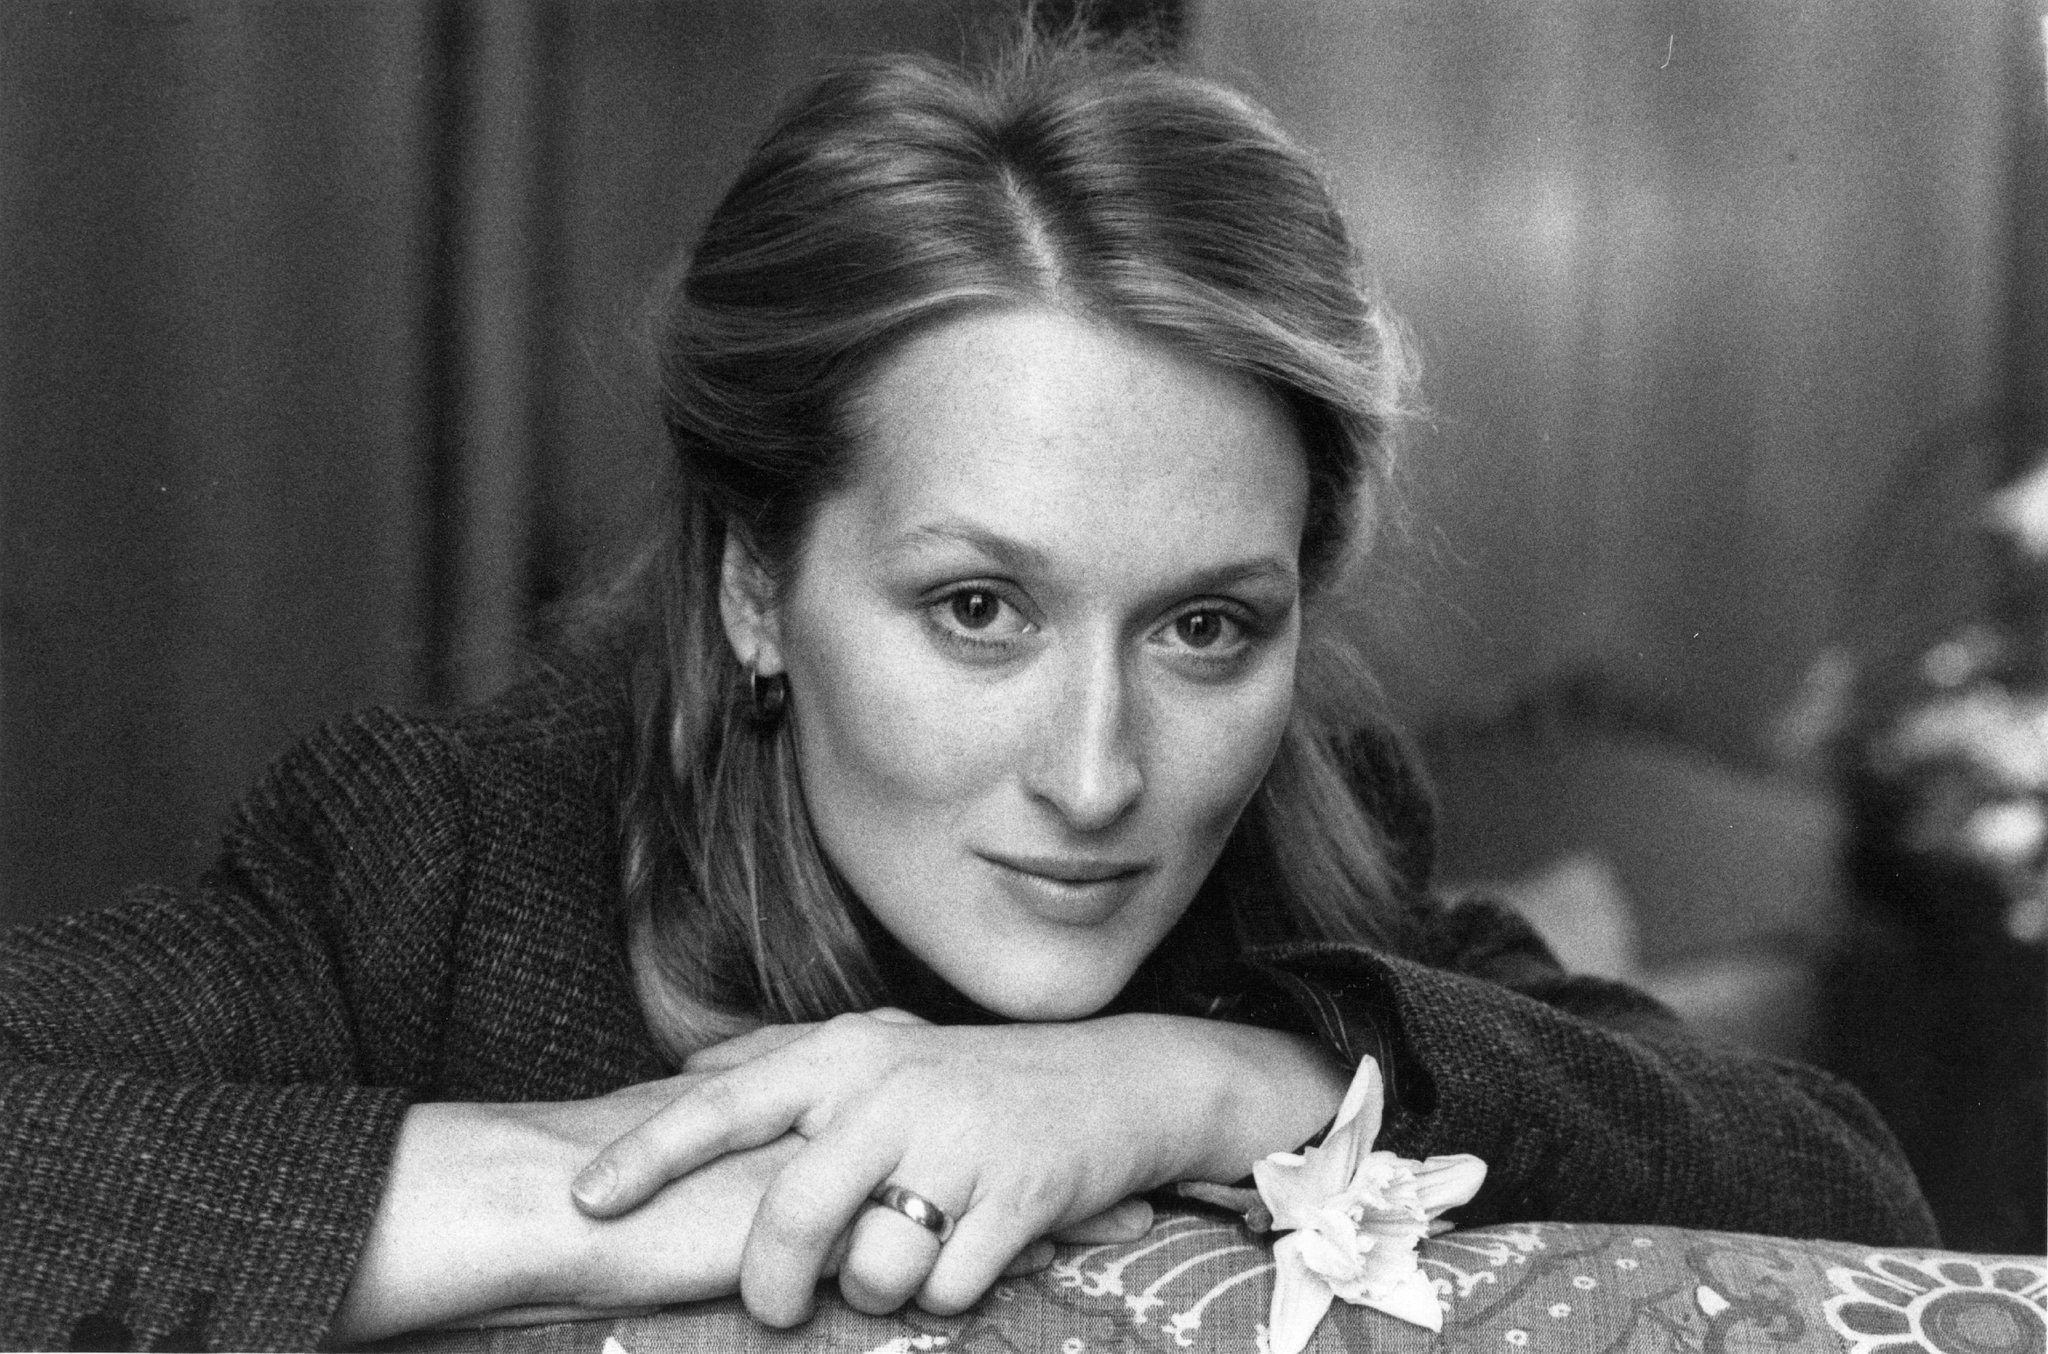 Thinking about HER today. Happy birthday to the queen of being *that* girl, the one and only Meryl Streep. 